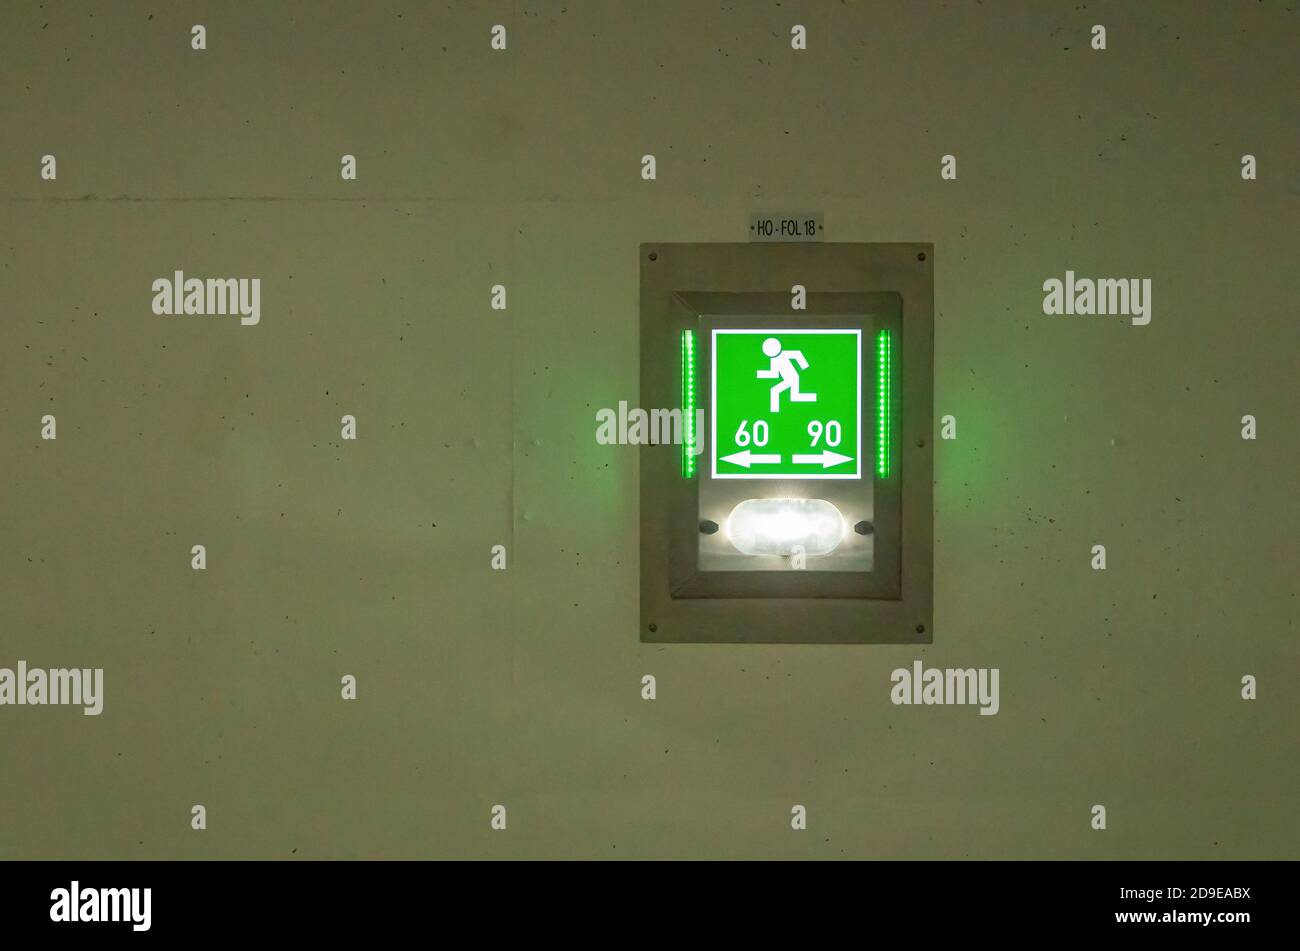 Green sign emergency exit 60 90 in a tunnel. Stock Photo